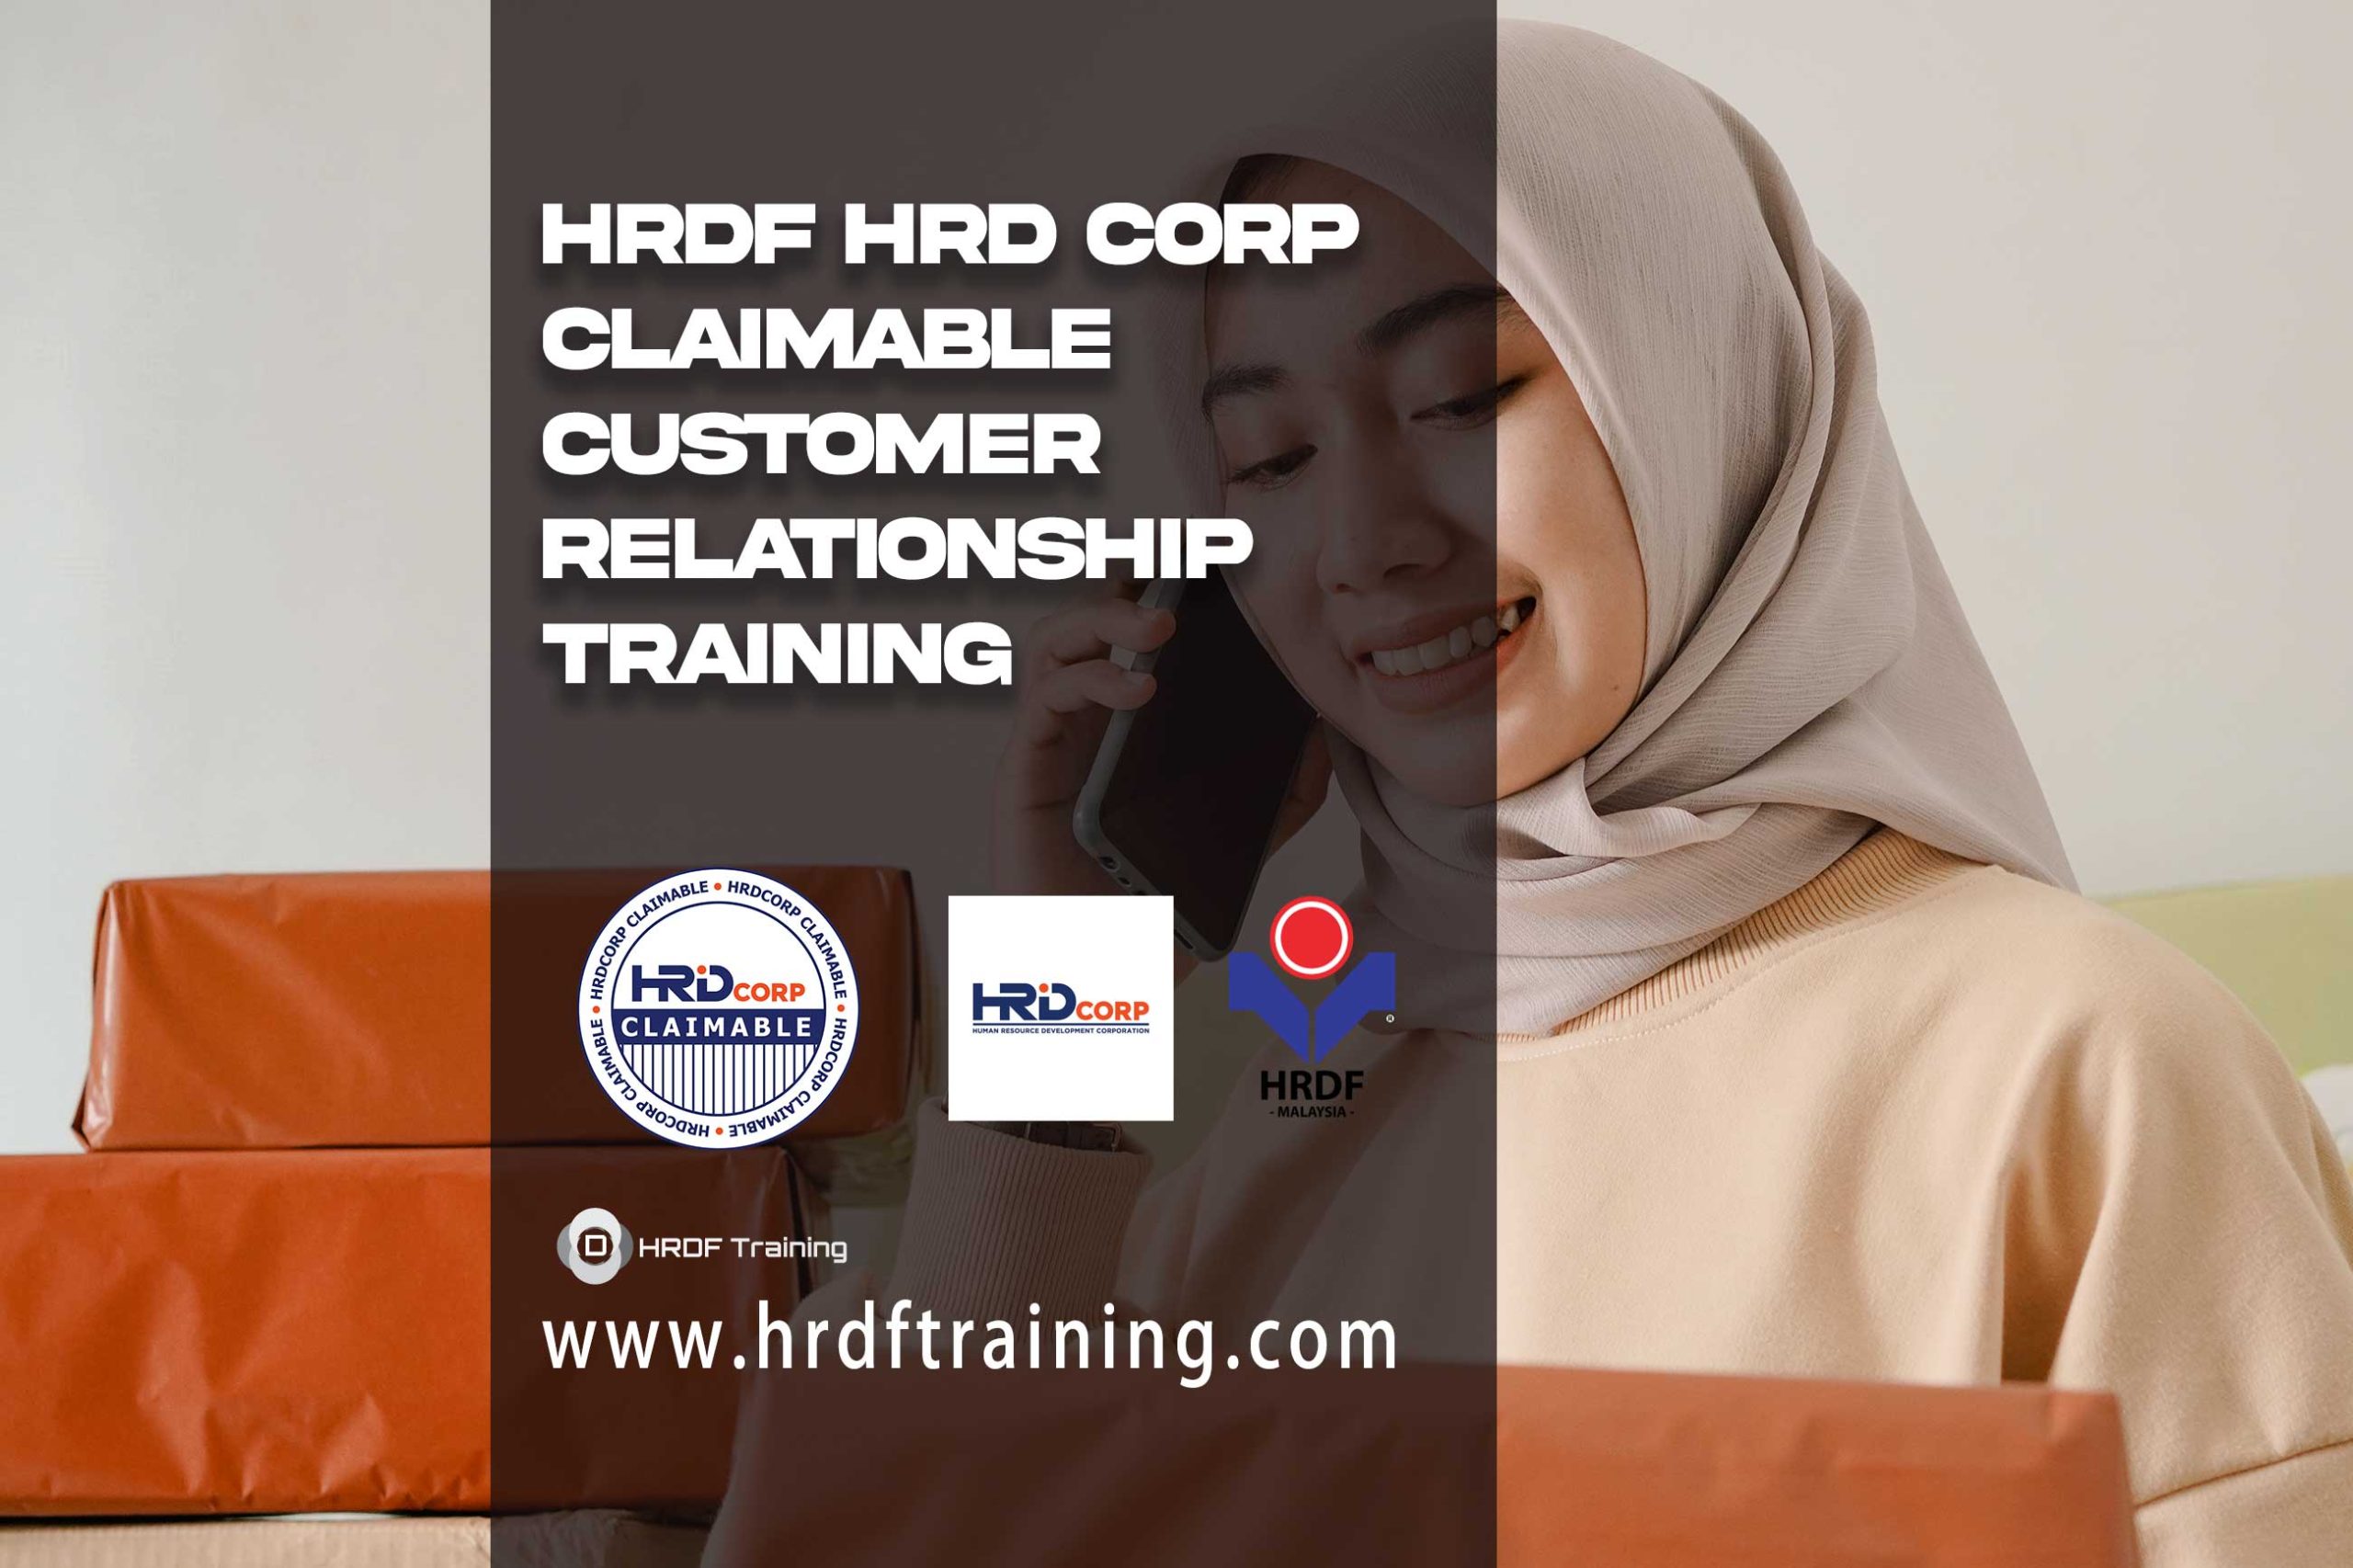 HRDF-HRD-Corp-Claimable-Customer-Relationship-Training